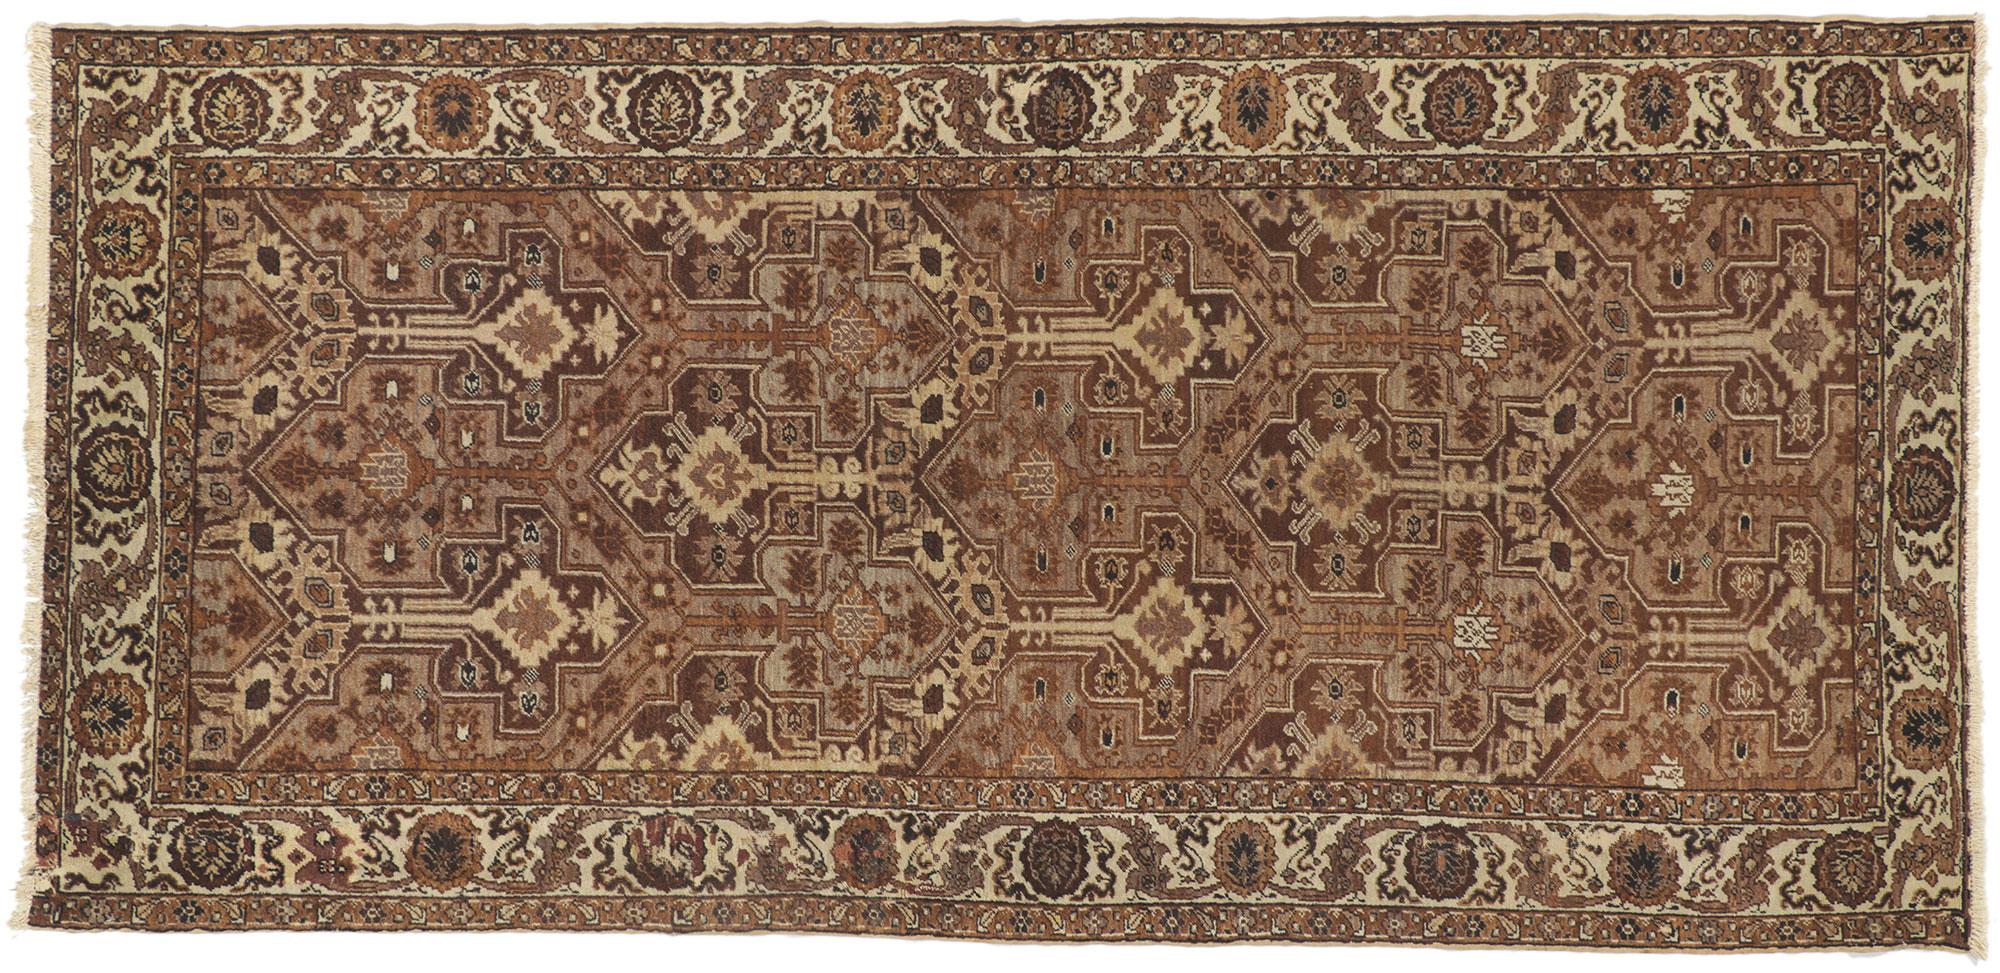 Vintage Turkish Sivas Rug with Warm Earth-Tone Colors For Sale 3